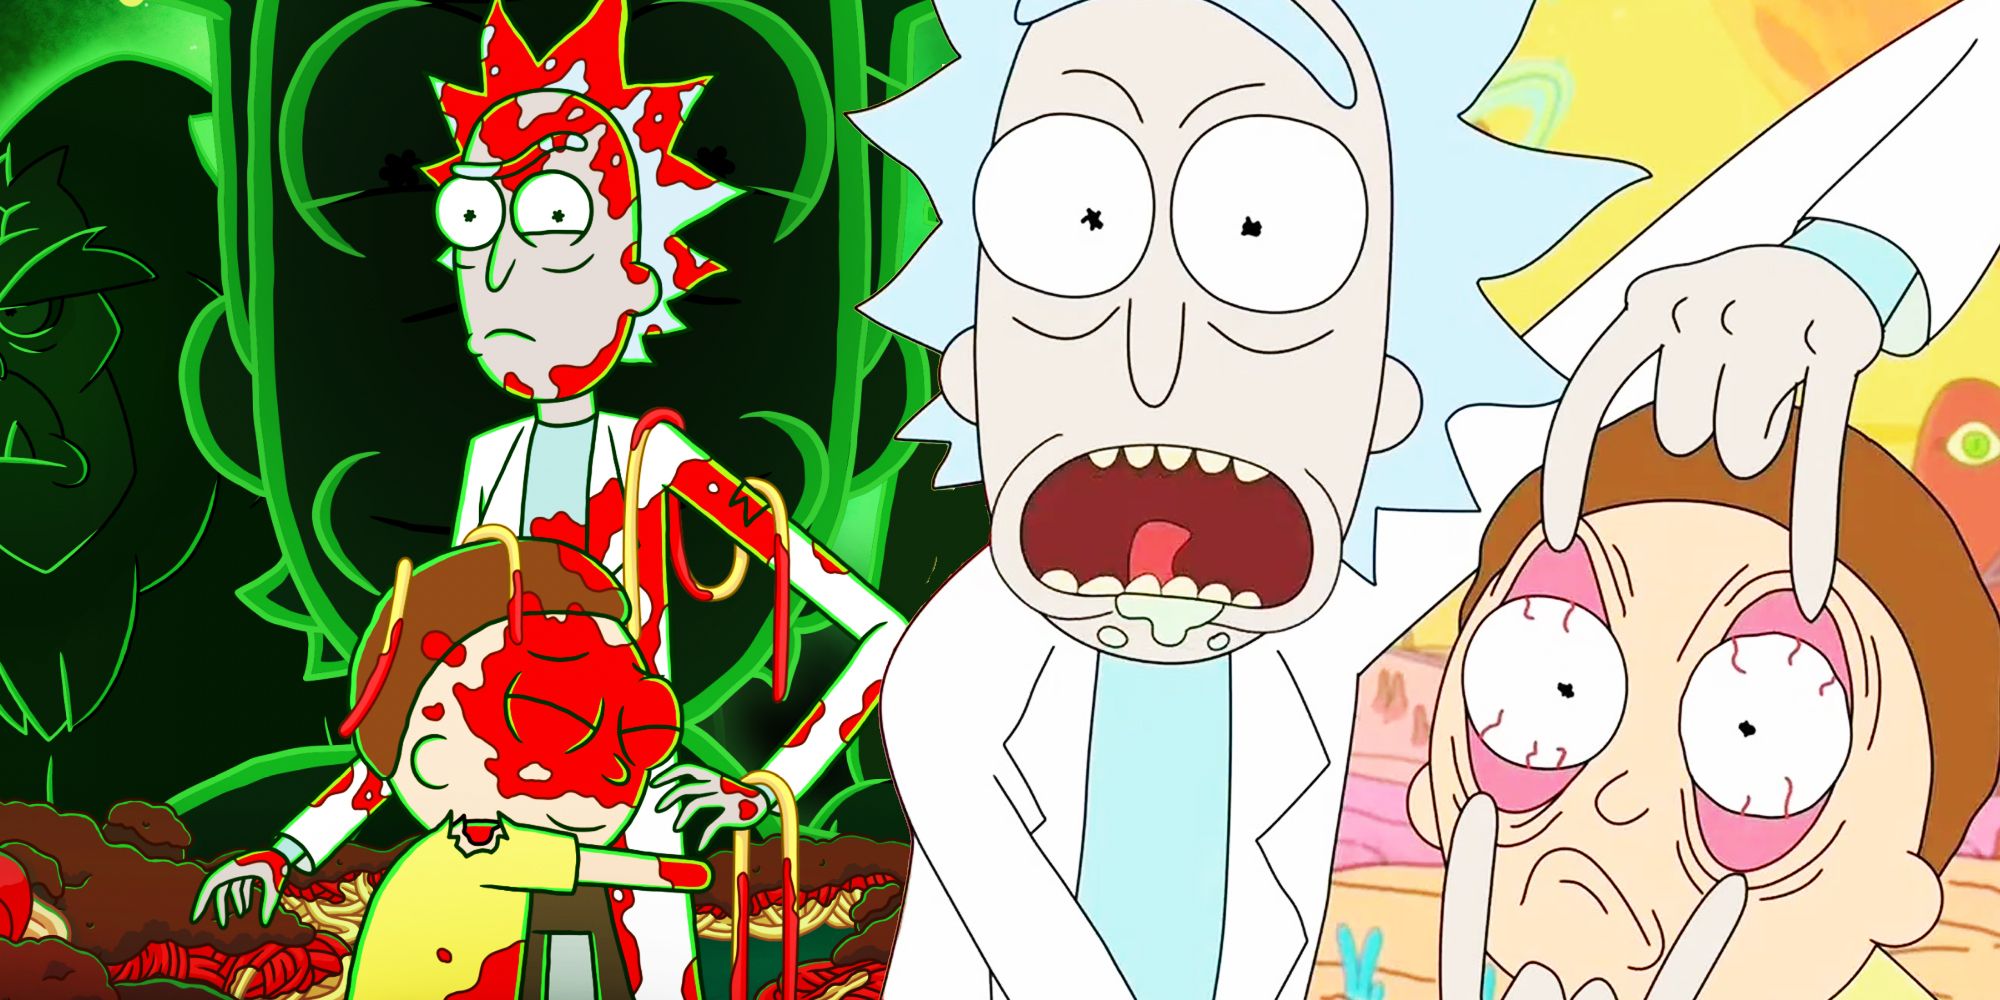 Rick and Morty season 7 premiere review: the boys seem to be back